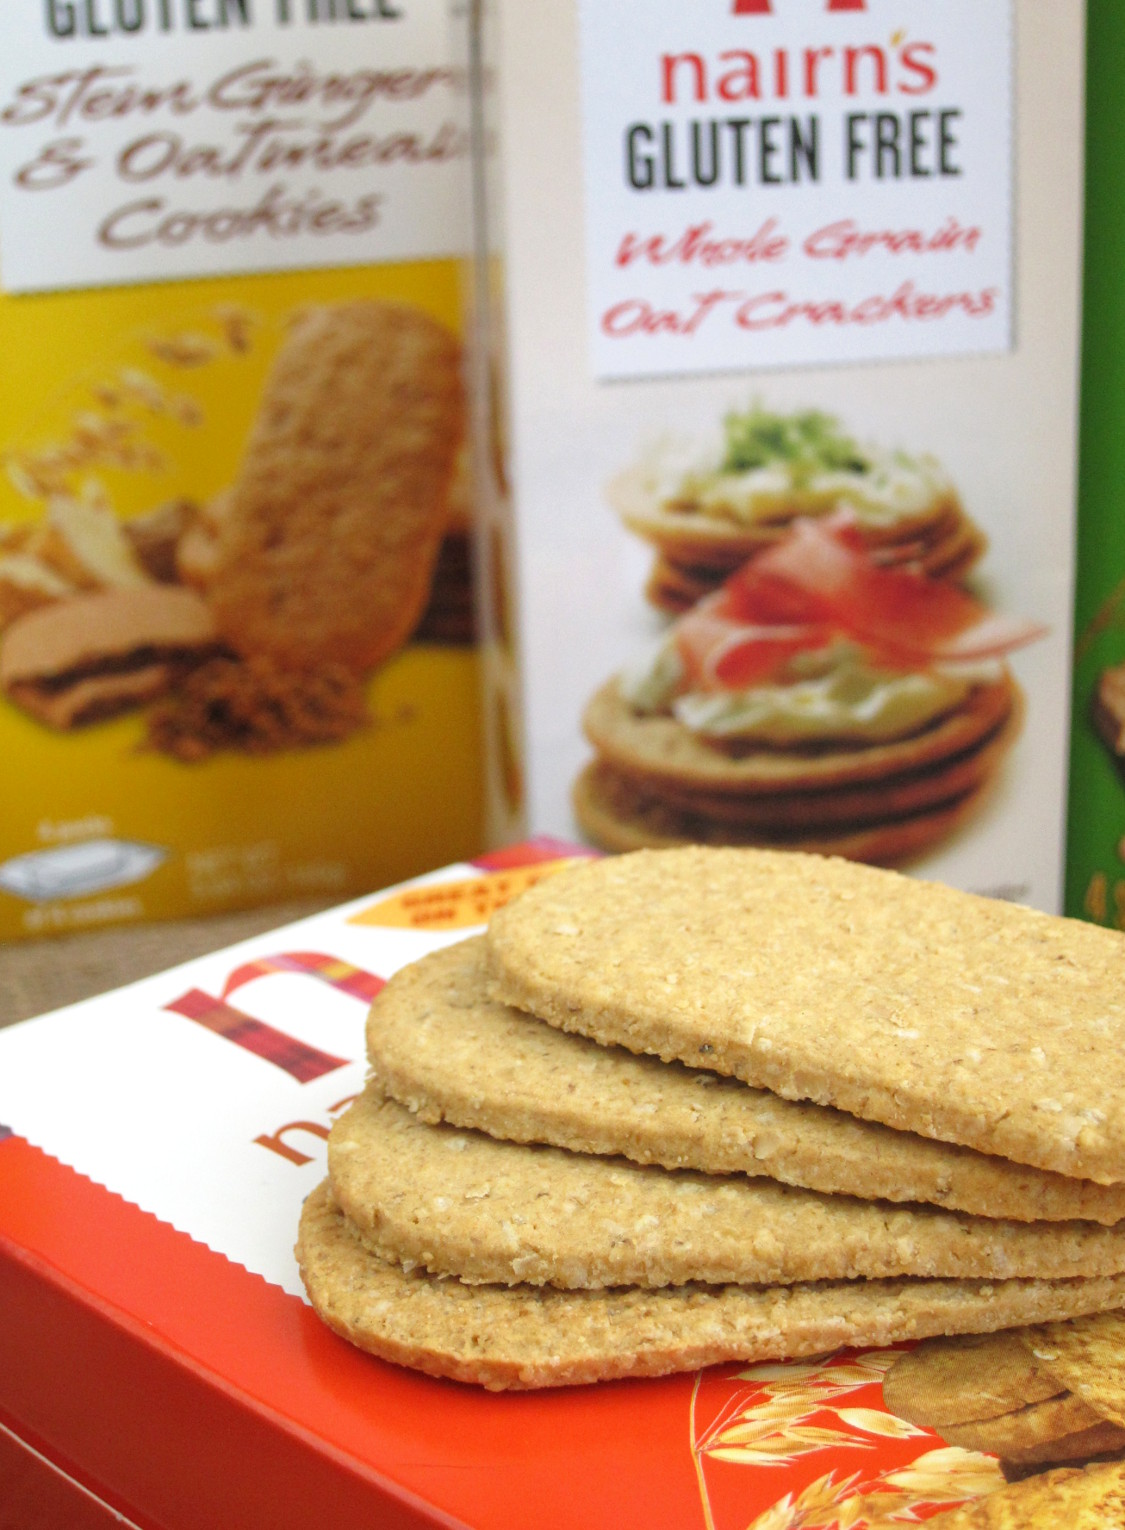 NEW BRAND ALERT: Greater Goods Joins the U.S. Snack Market with  Better-for-You Cookies, Crackers and Biscotti